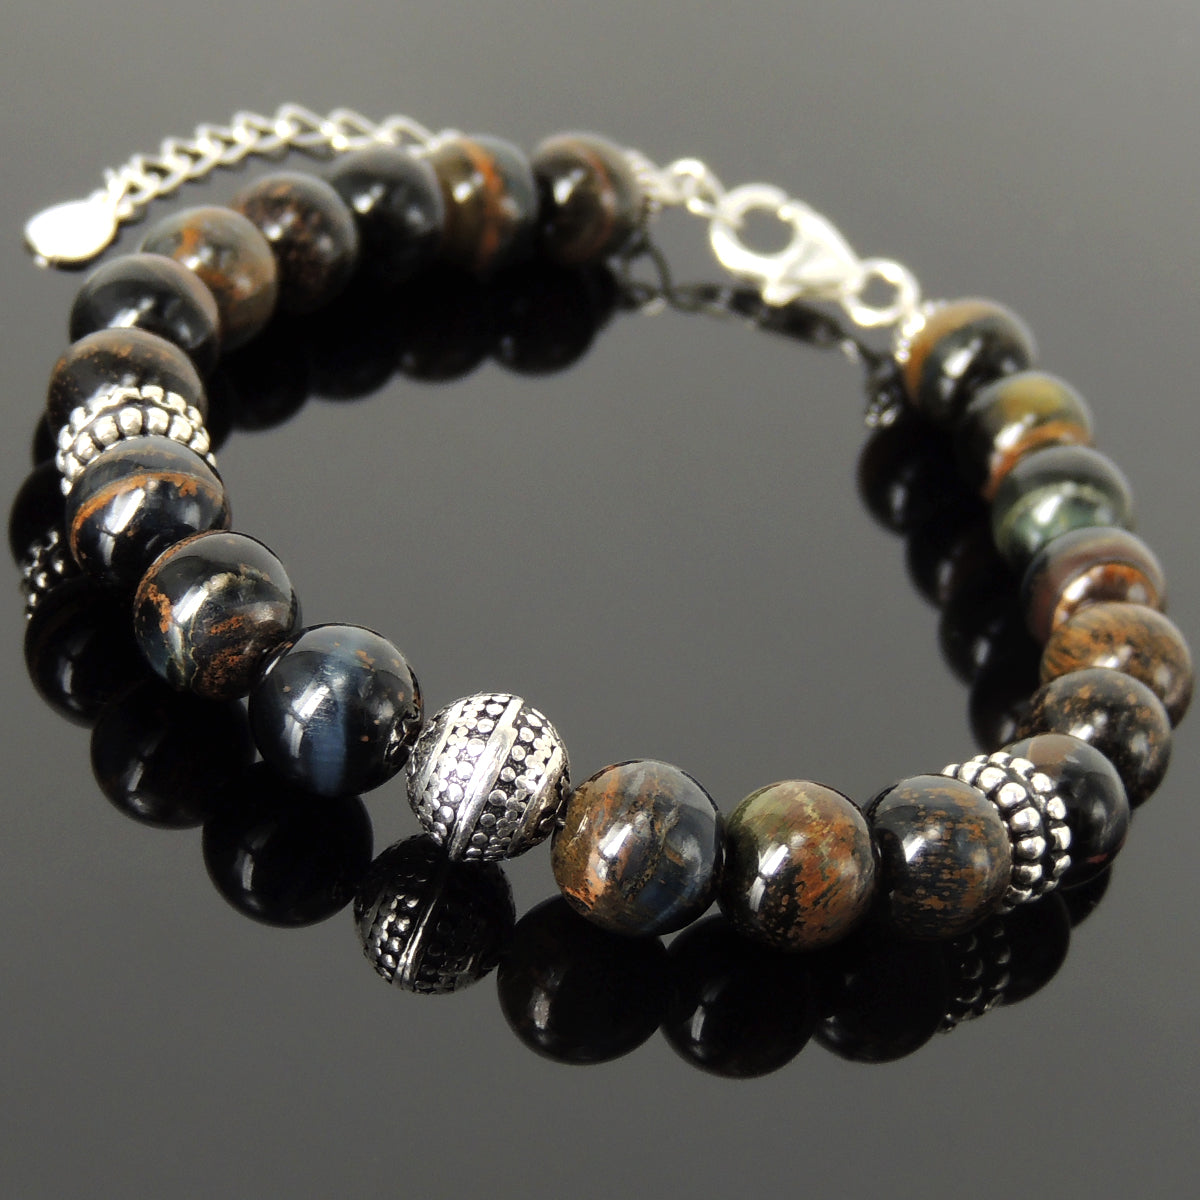 Yoga Pilates Wellness Energy Bracelet with Rare Mixed Blue Tiger Eye Healing 8mm Gemstone Tarot Crystals & Genuine S925 Sterling Silver Parts - BR1495